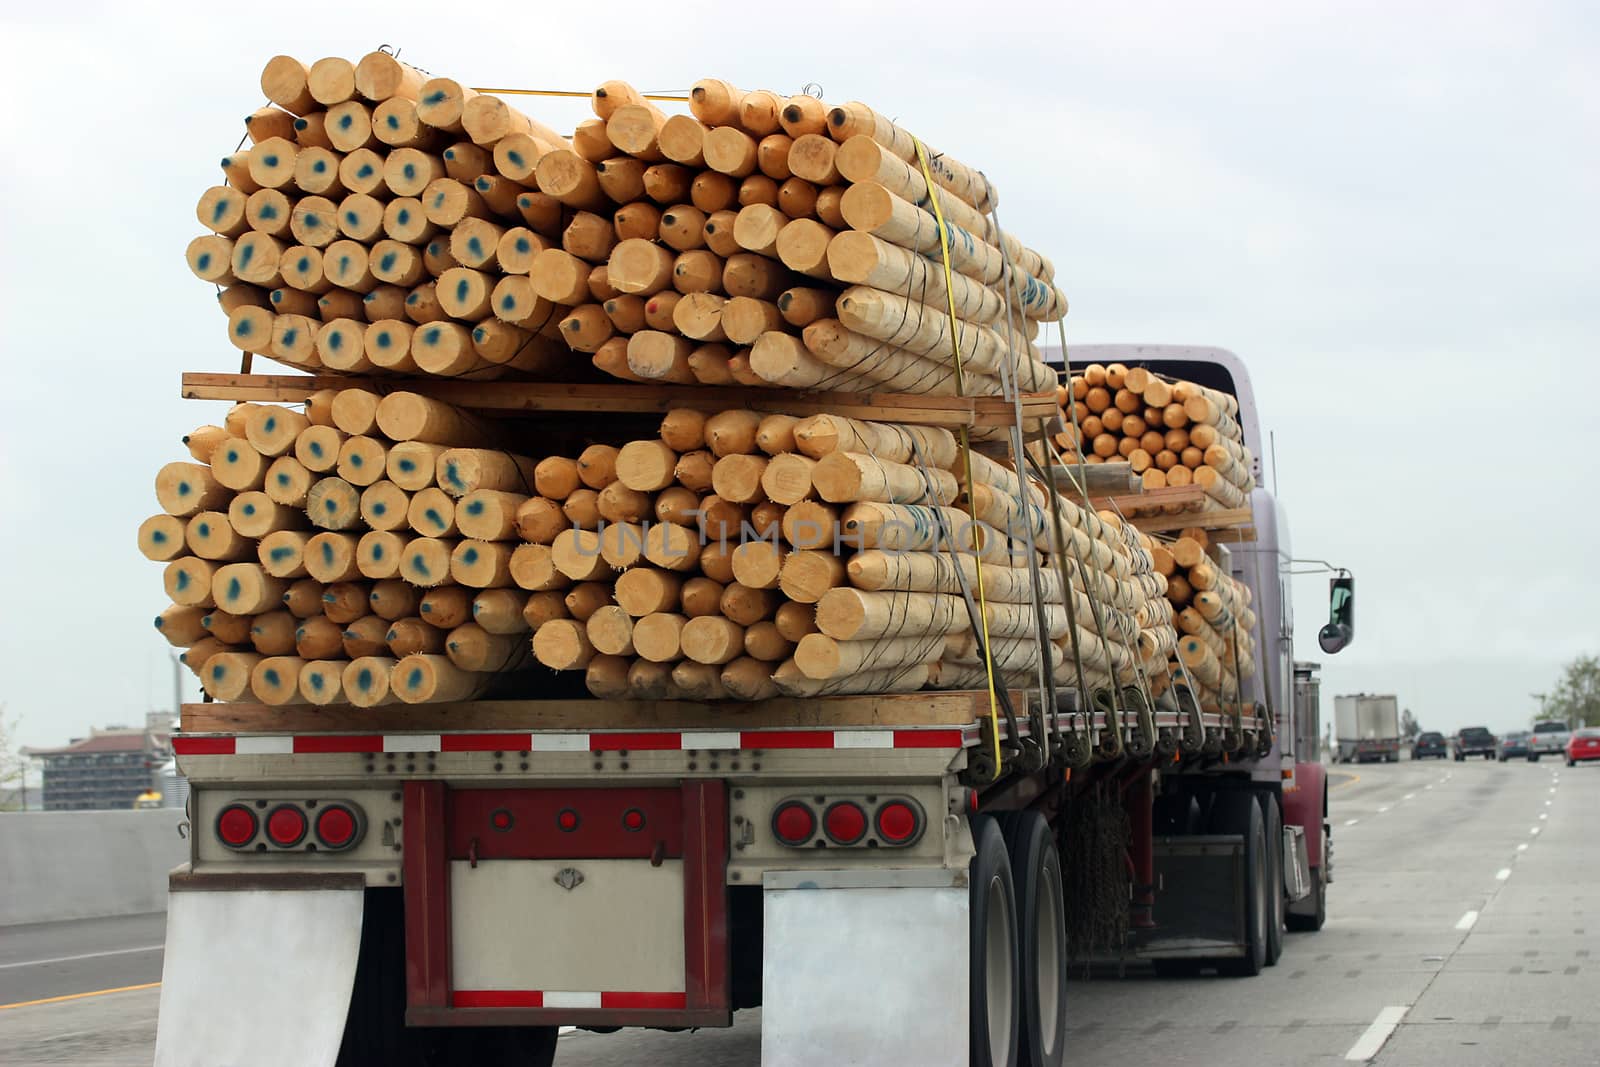 Large truck transporting wood